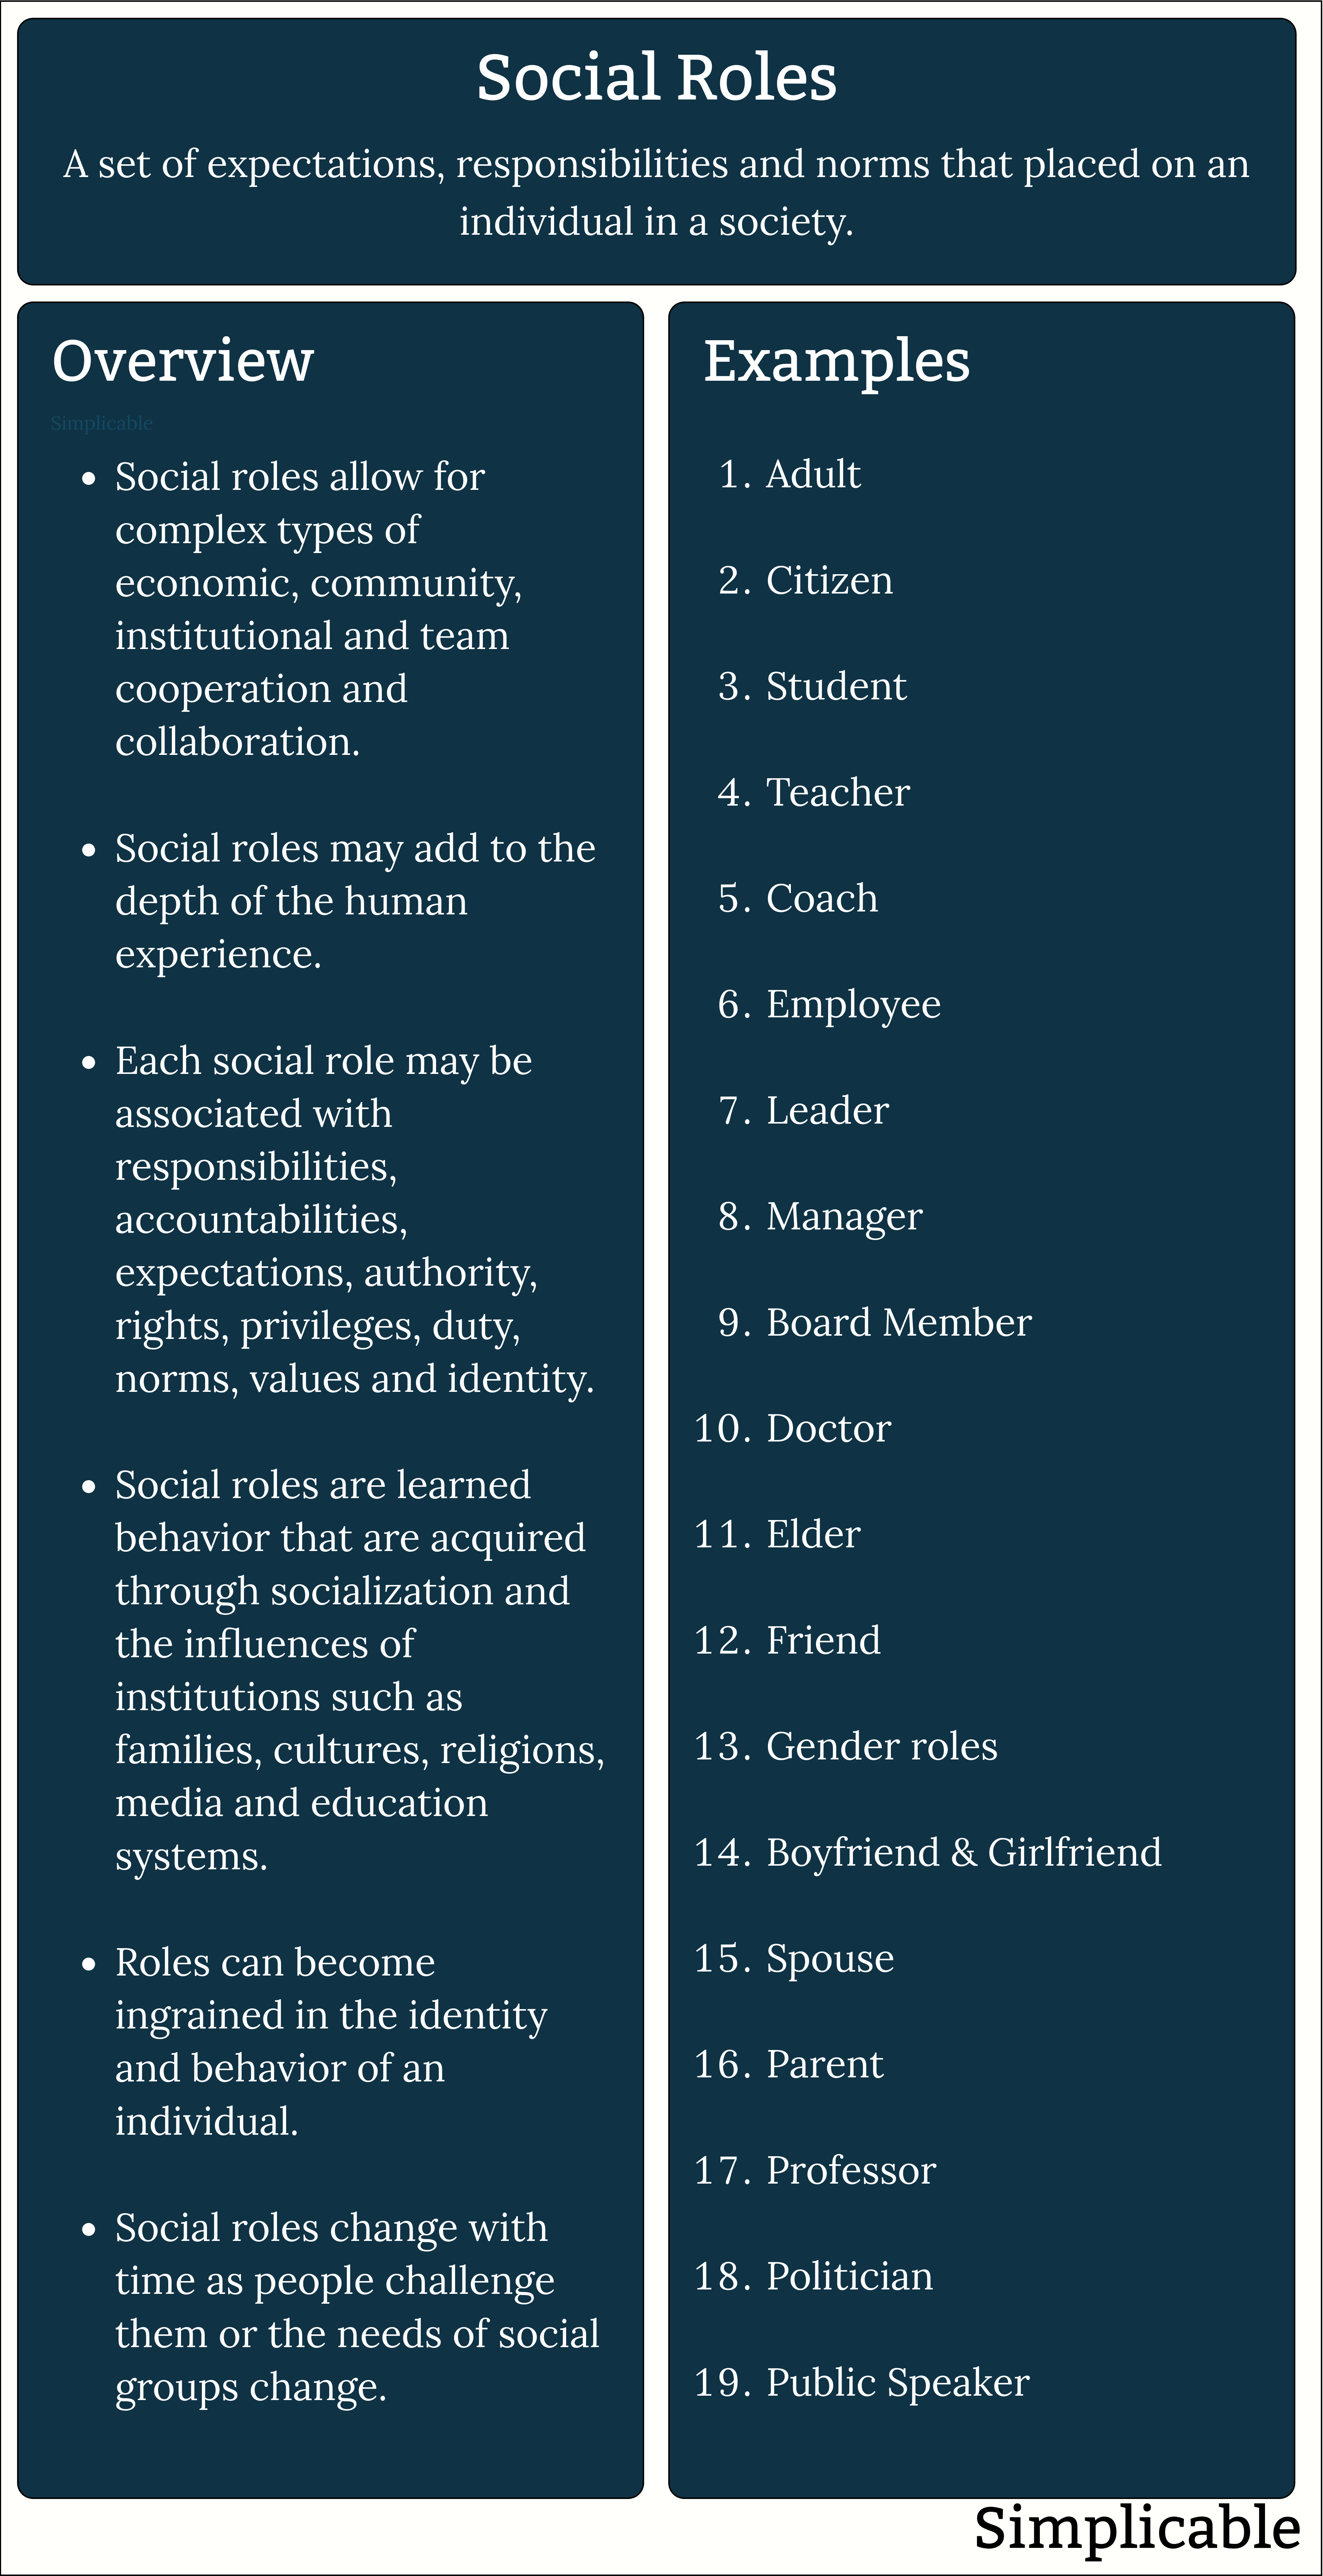 social roles overview and examples